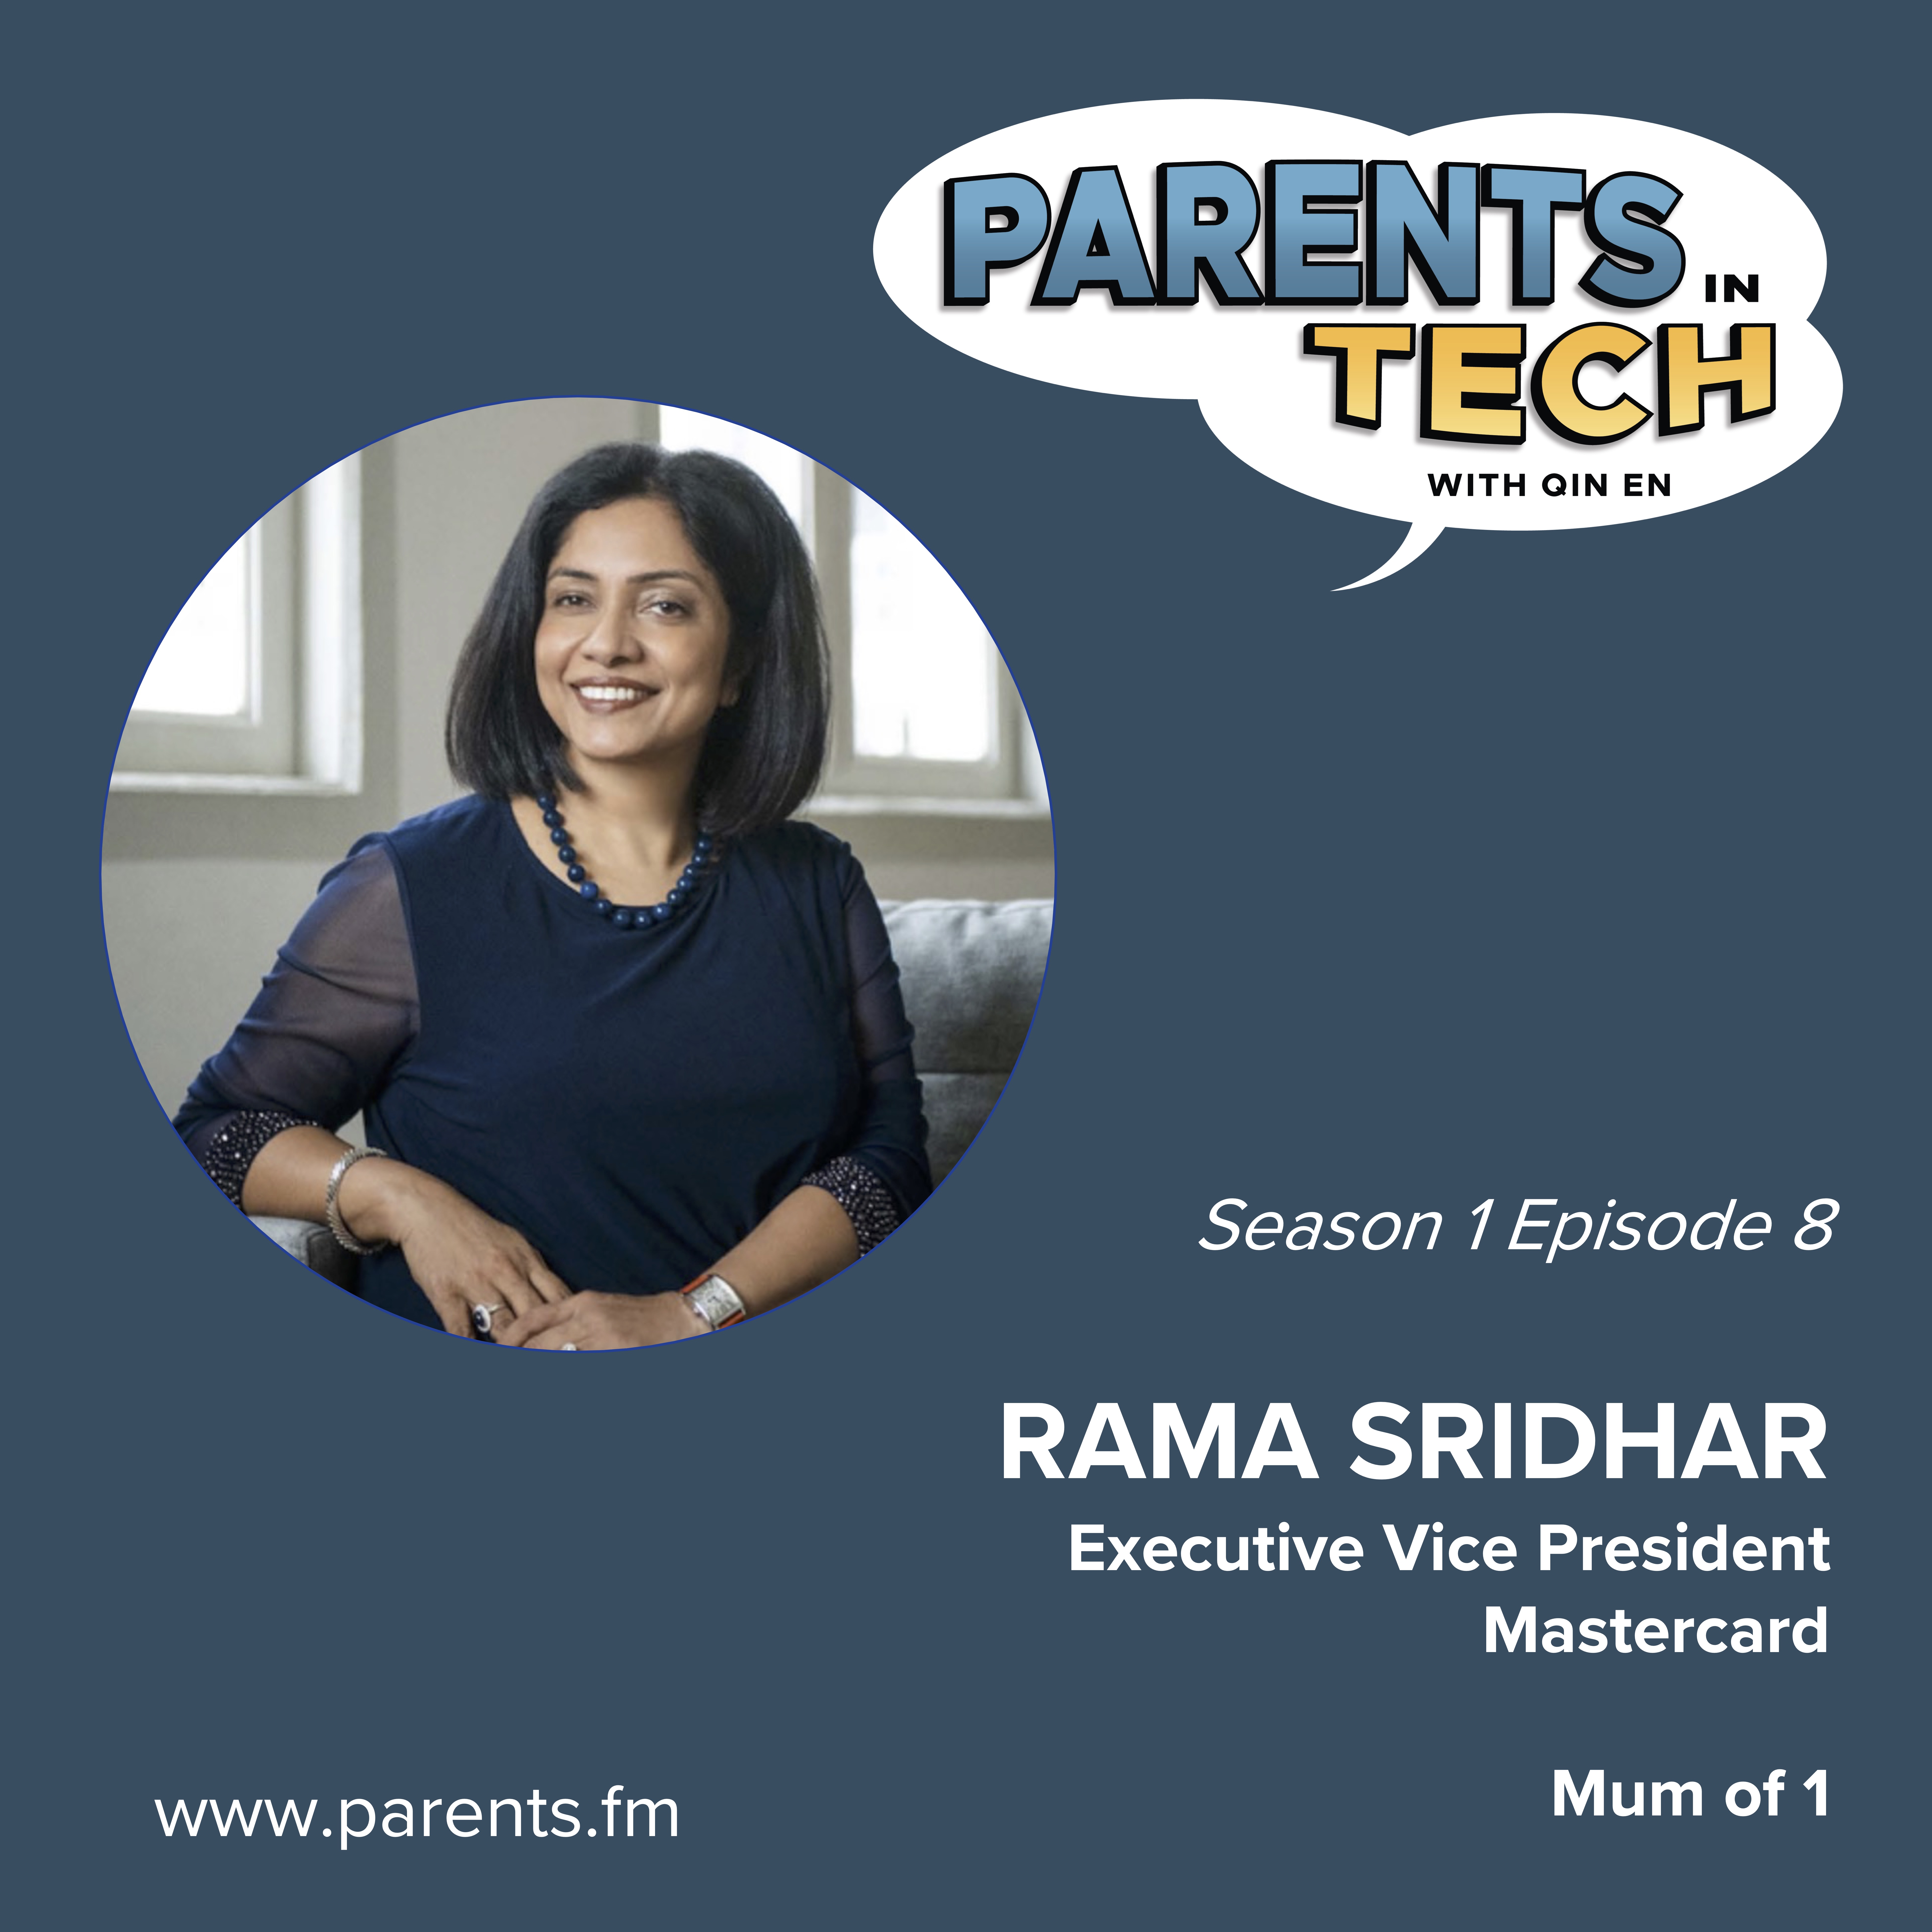 Career Breaks, Parenting Teenagers, and Shared Responsibilities, with Rama Sridhar